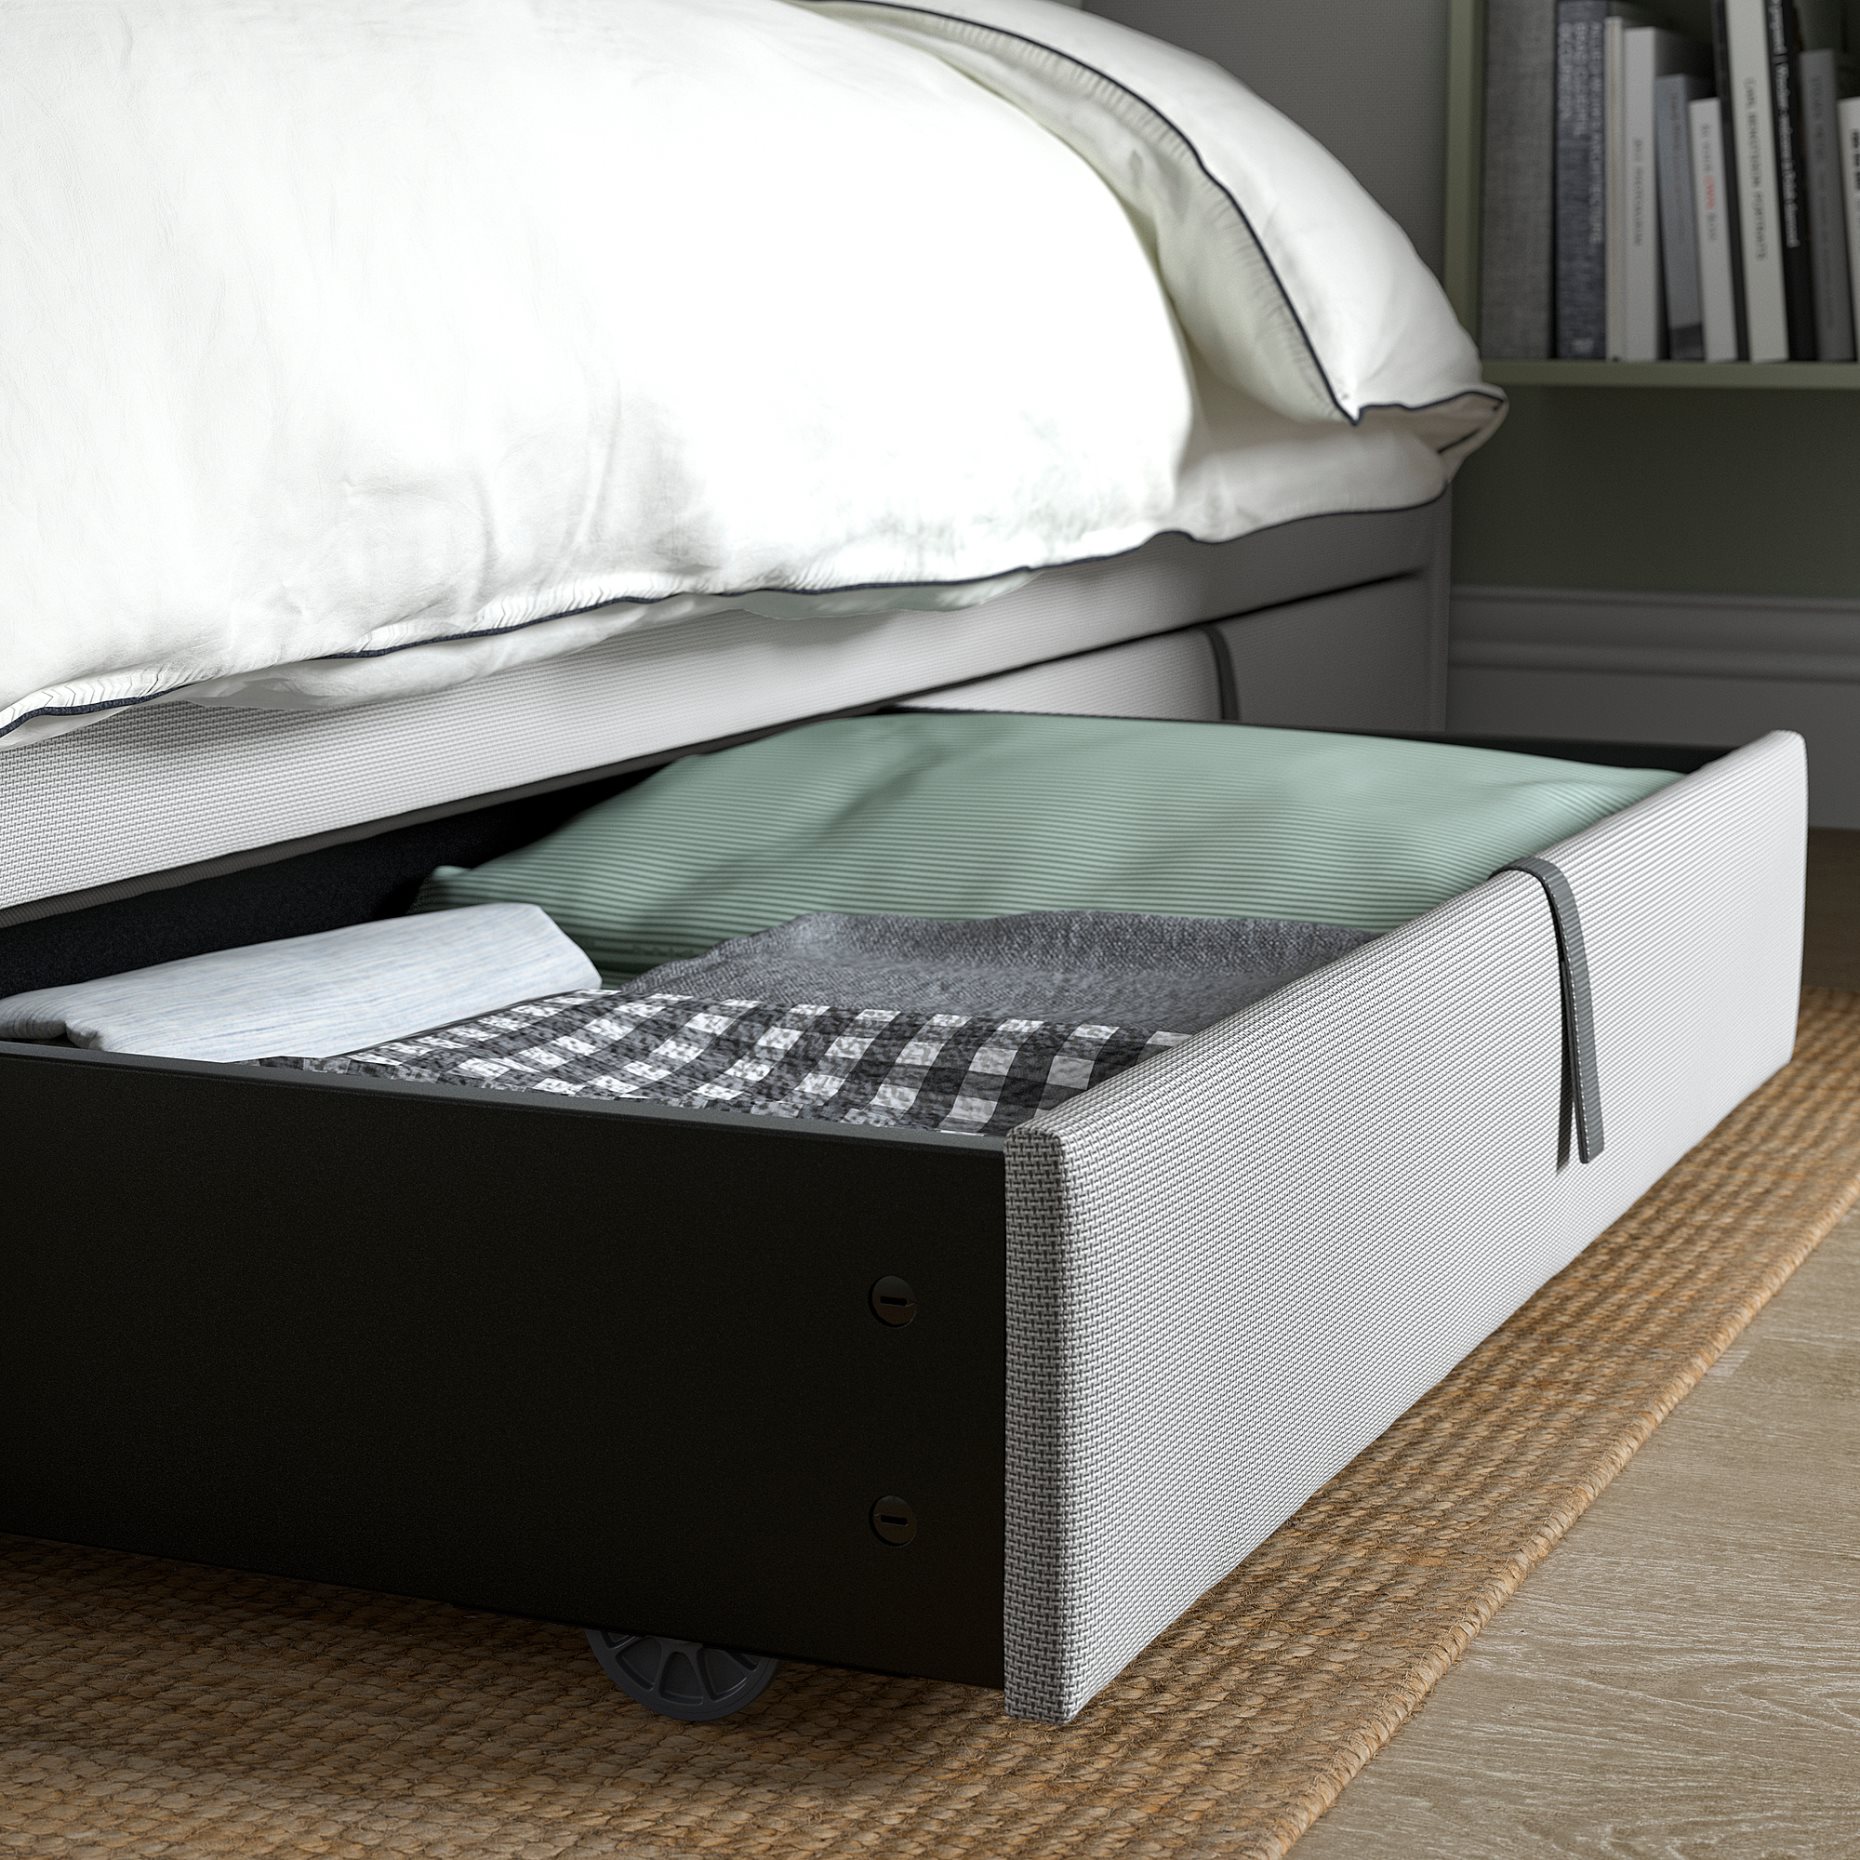 GLADSTAD, upholstered bed with 4 storage boxes, 140x200 cm, 094.070.24